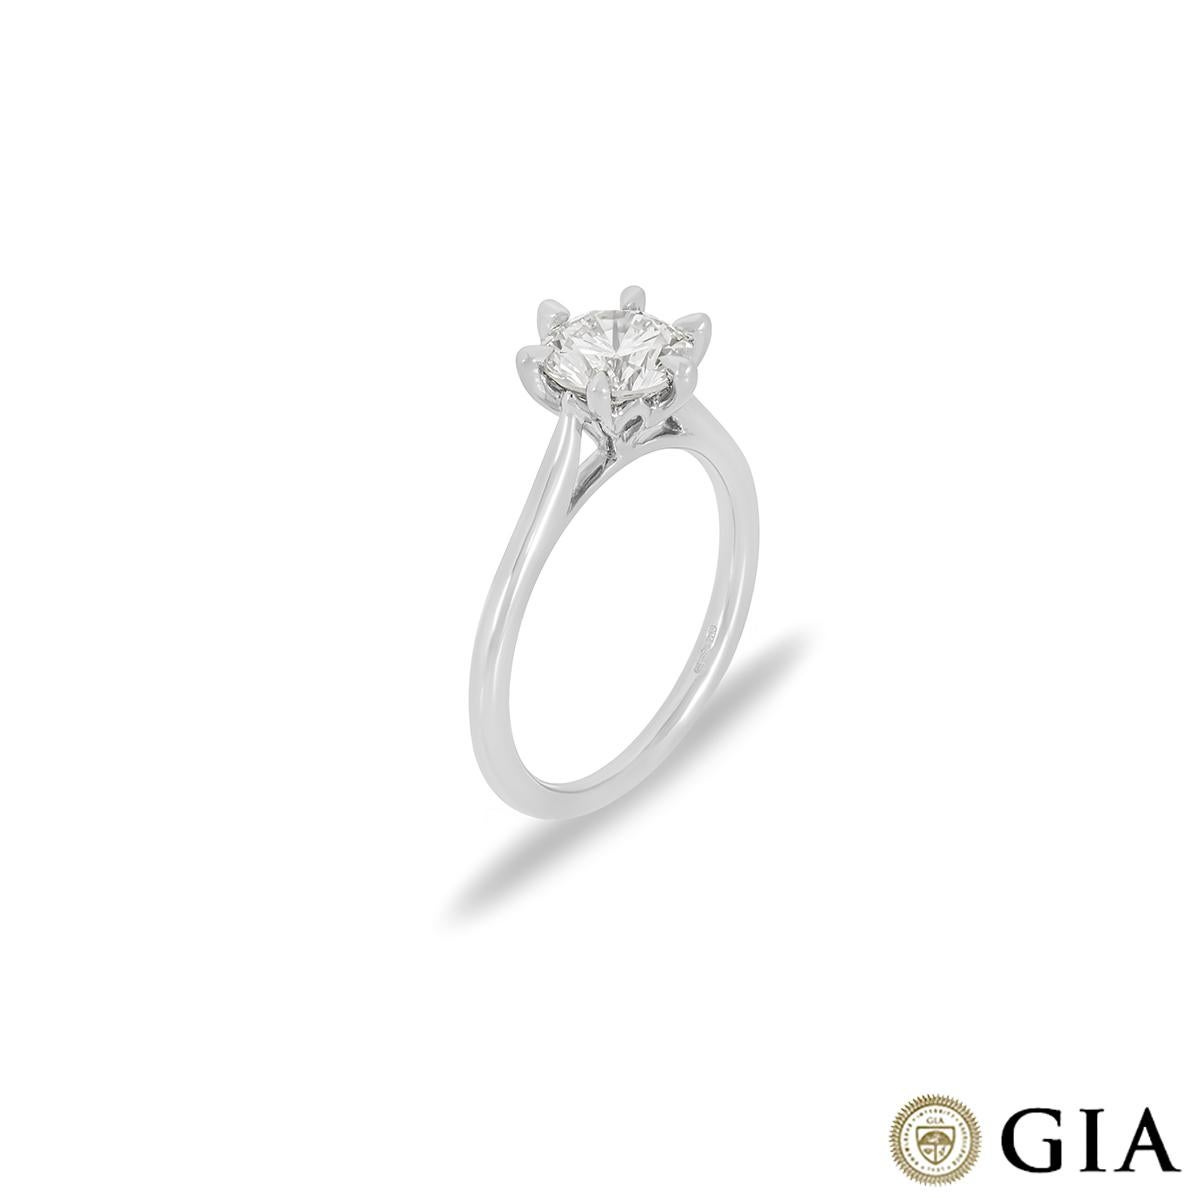 A striking platinum diamond engagement ring. The solitaire is set to the centre in a modern six prong mount with a round brilliant cut diamond weighing 1.32ct, K colour and SI2 clarity. The 1.7mm wide ring has a gross weight of 4.32 grams and is